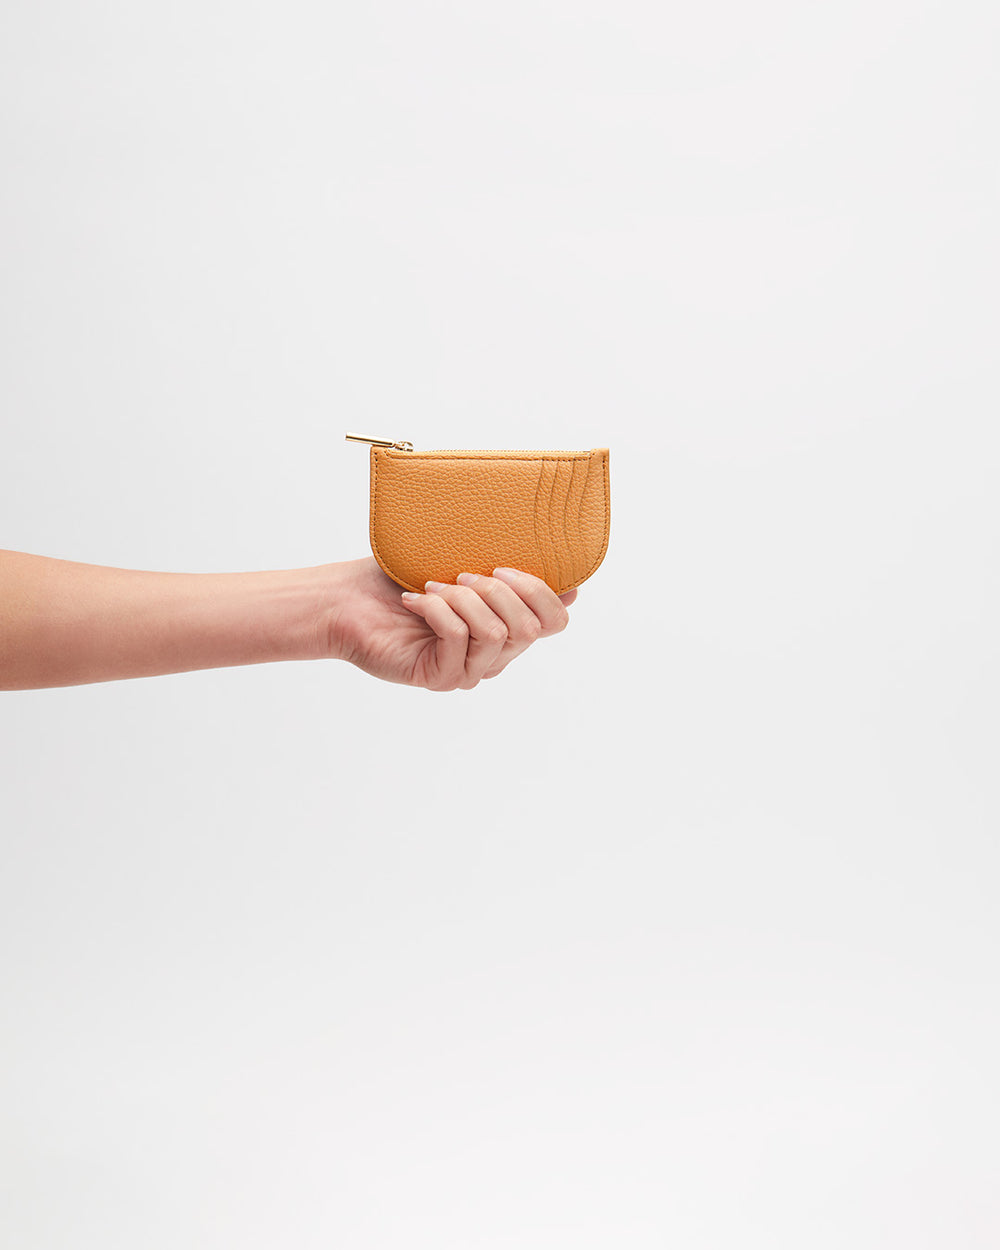 Hand holding a small purse against a plain background.